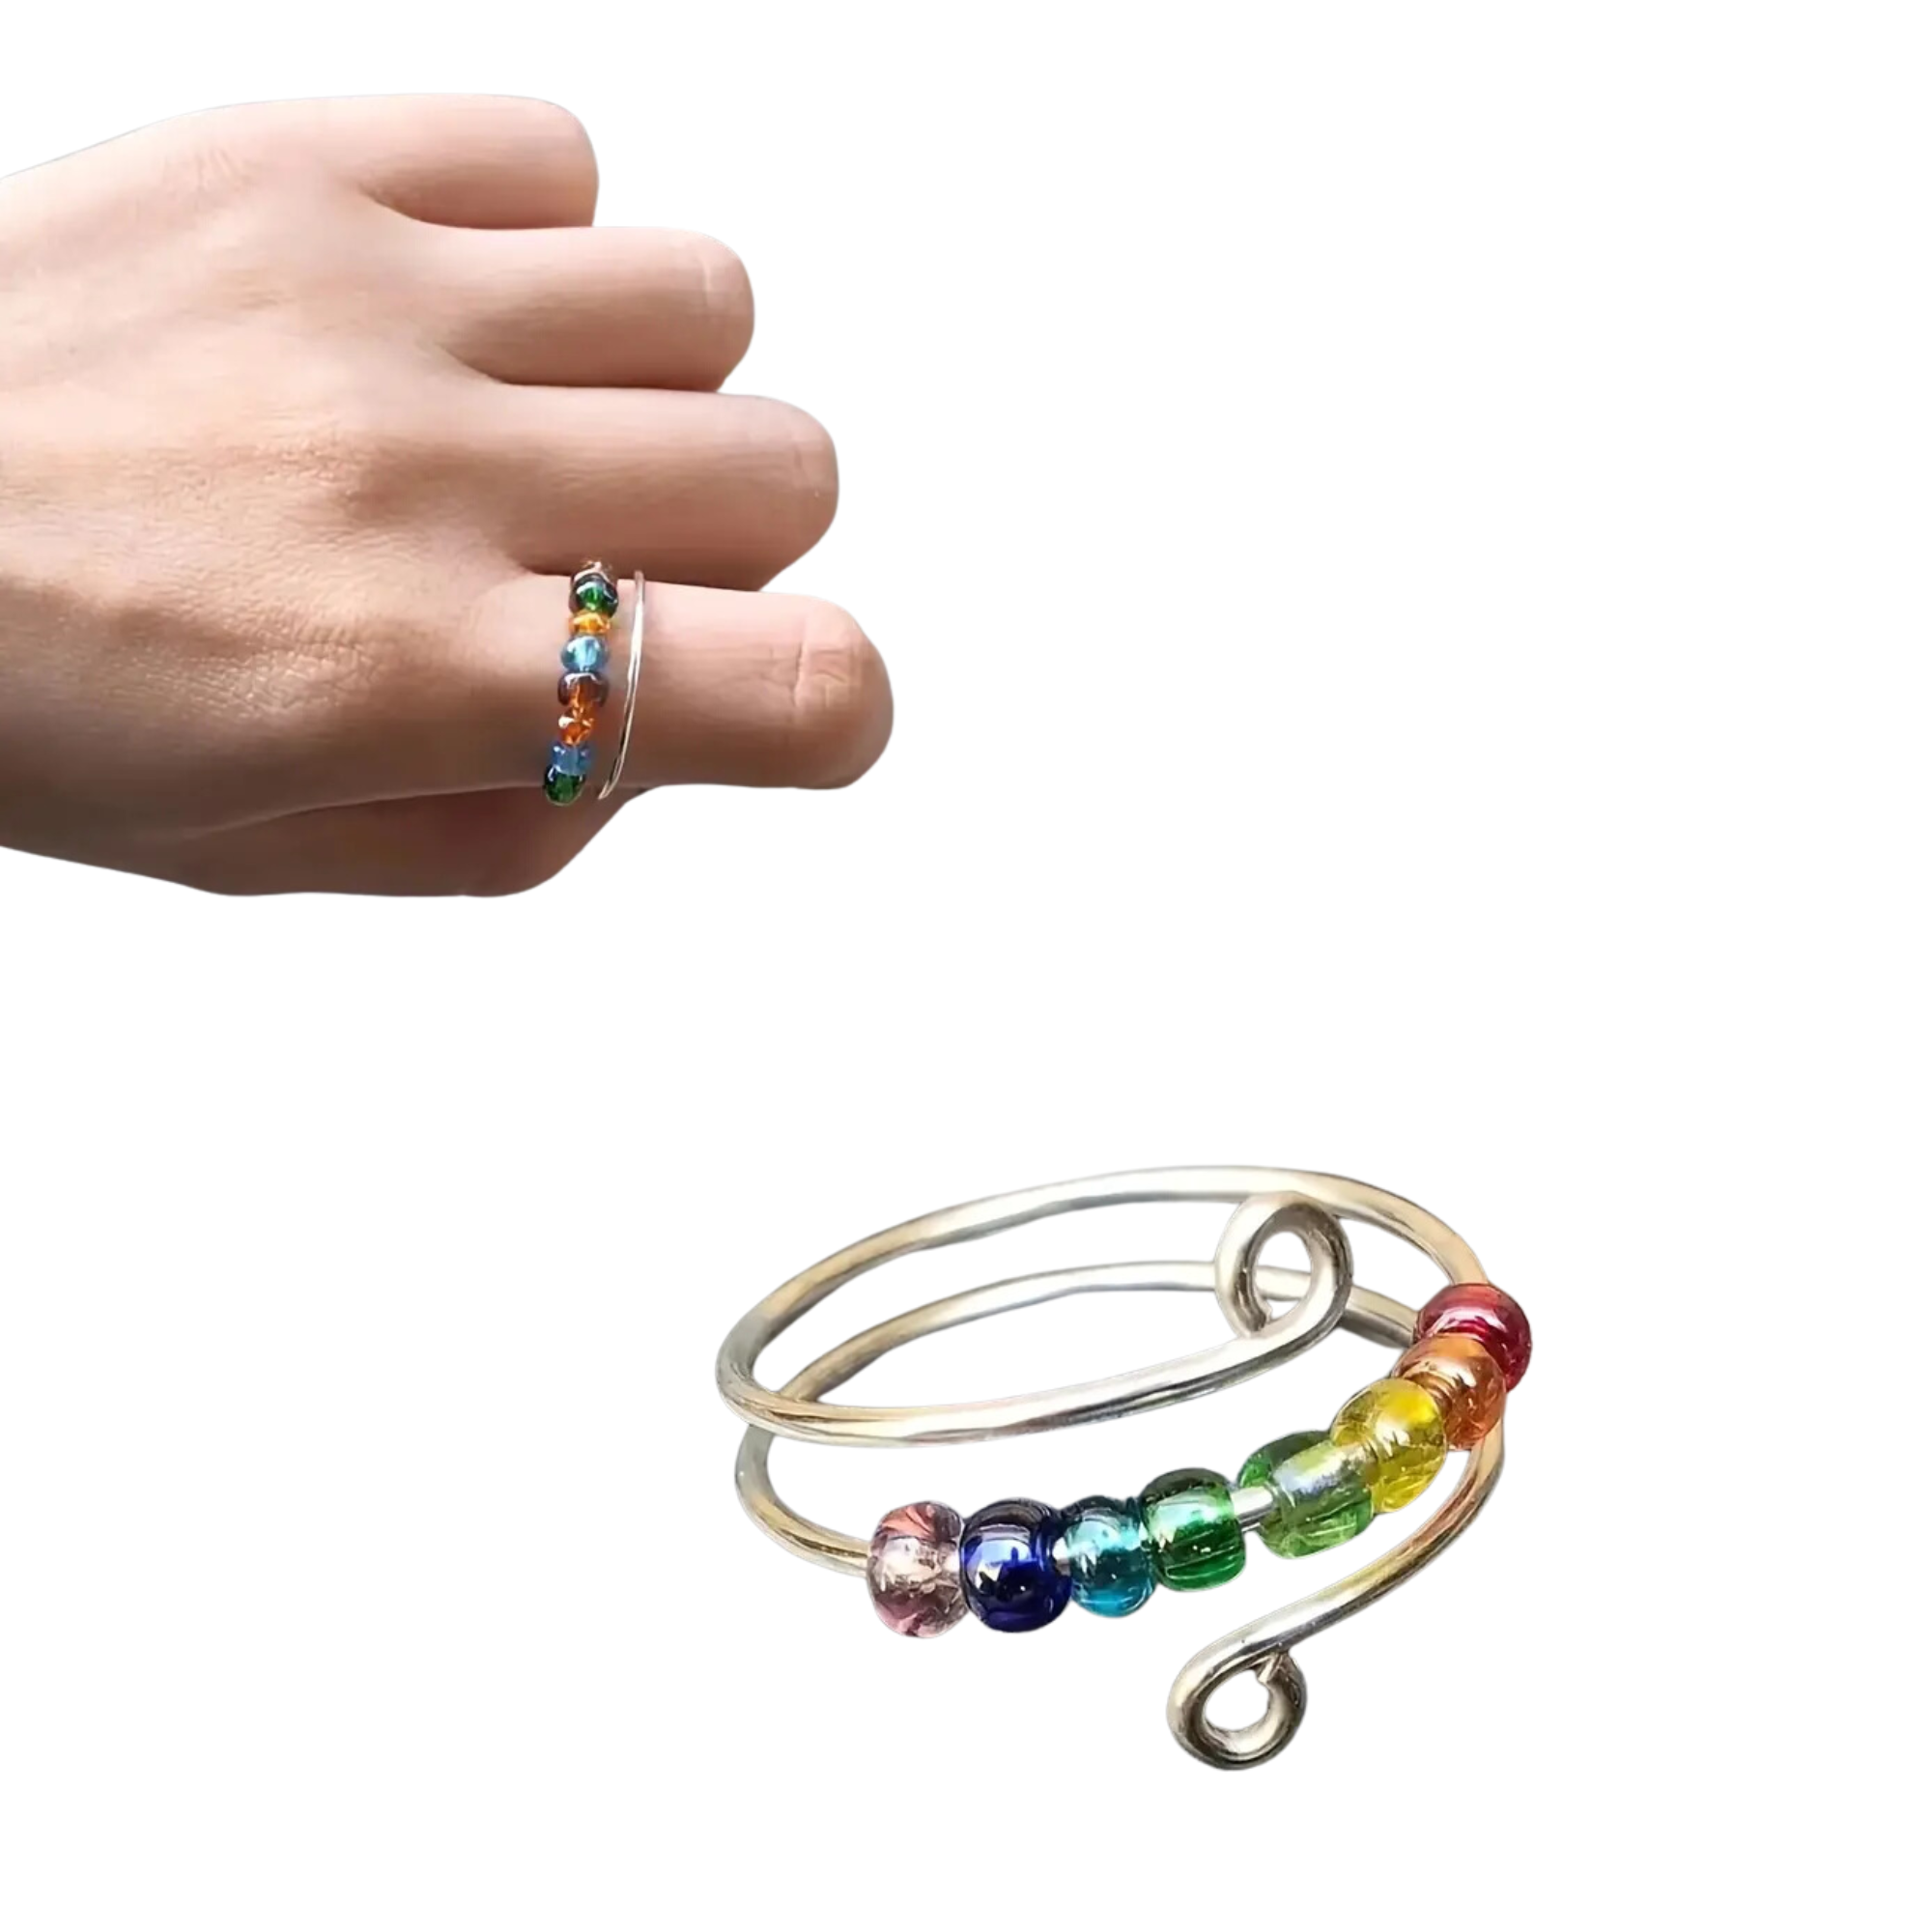 Adjustable Rings with Beads  Fidget Rings - Sensory Stand